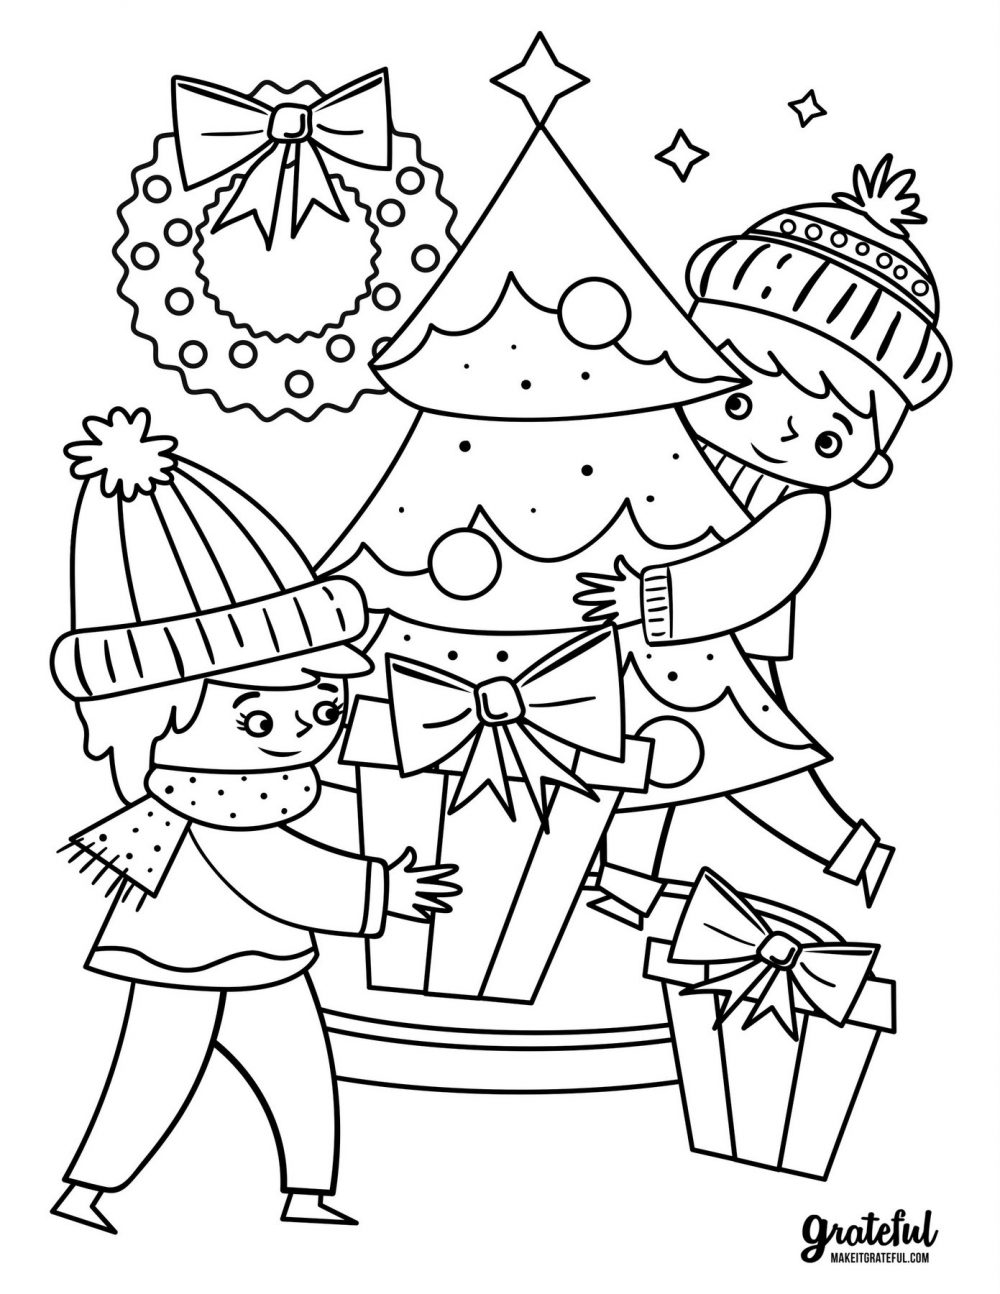 Christmas coloring pages Kids around the Christmas tree